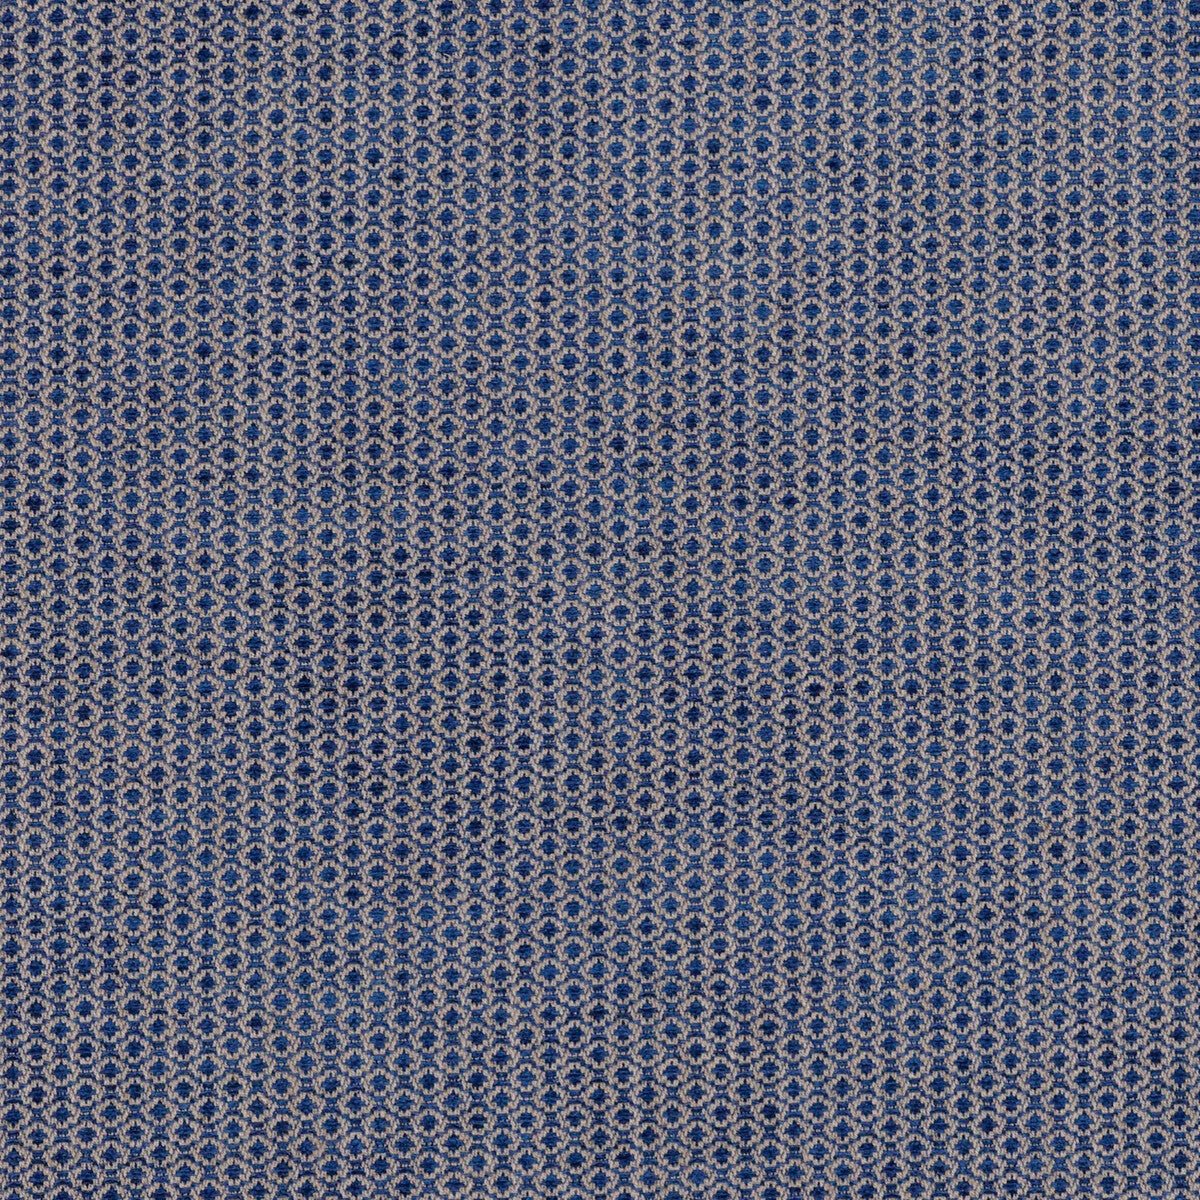 Cosgrove fabric in sapphire color - pattern BFC-3672.5.0 - by Lee Jofa in the Blithfield collection